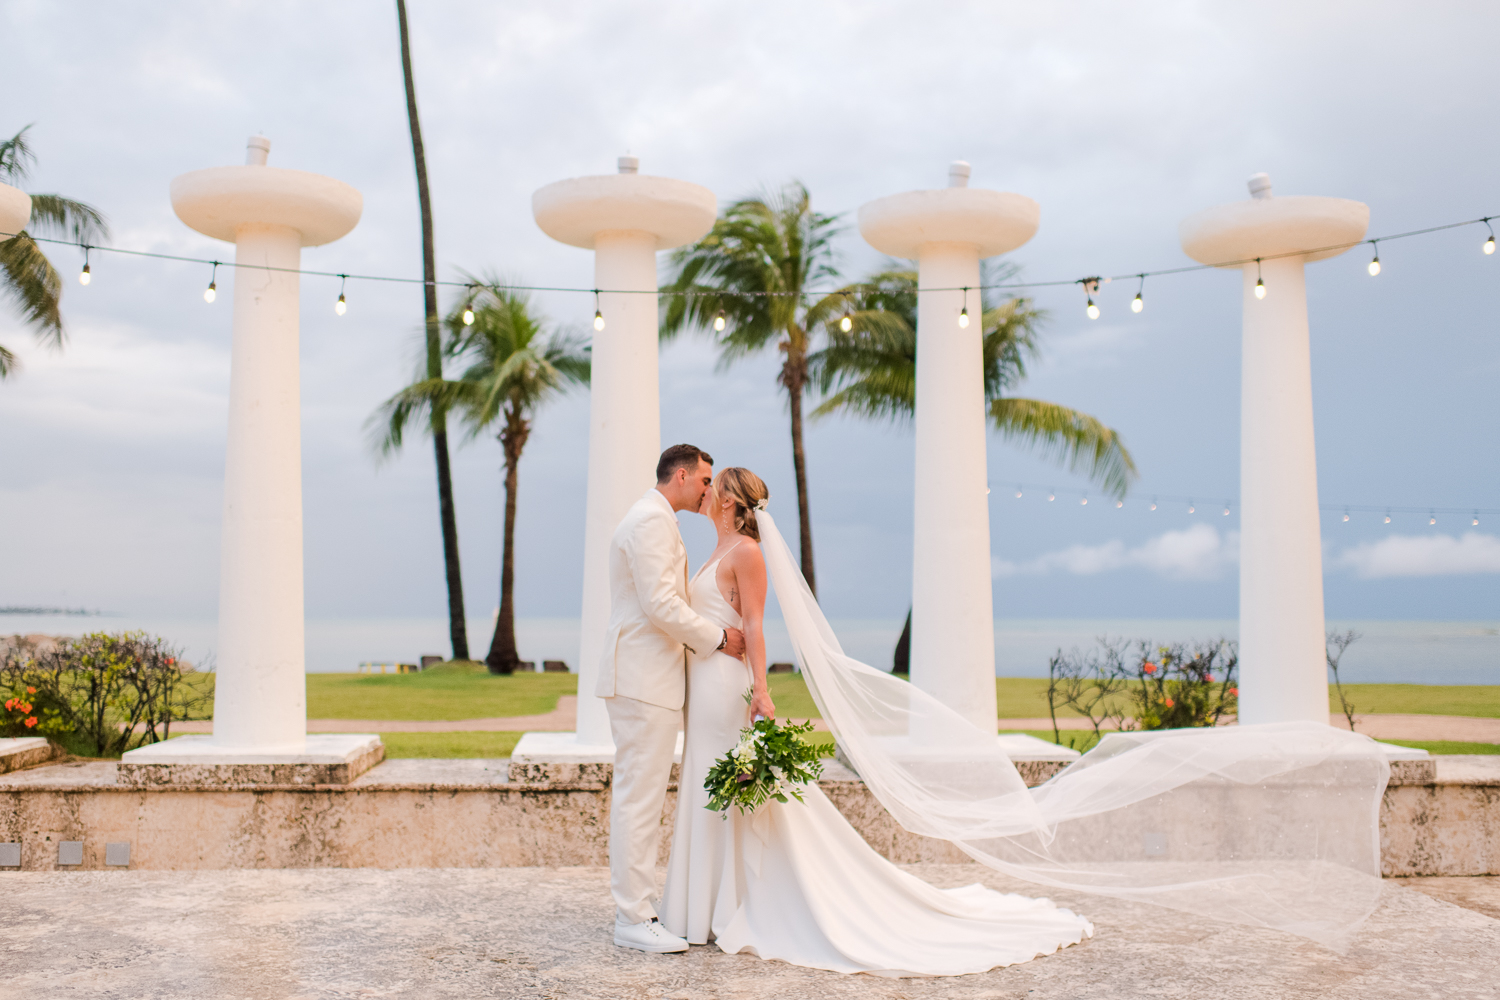 Make your wedding day unforgettable with stunning candid photography capturing all the special moments at Hyatt Regency Grand Reserve in Rio Grande, Puerto Rico